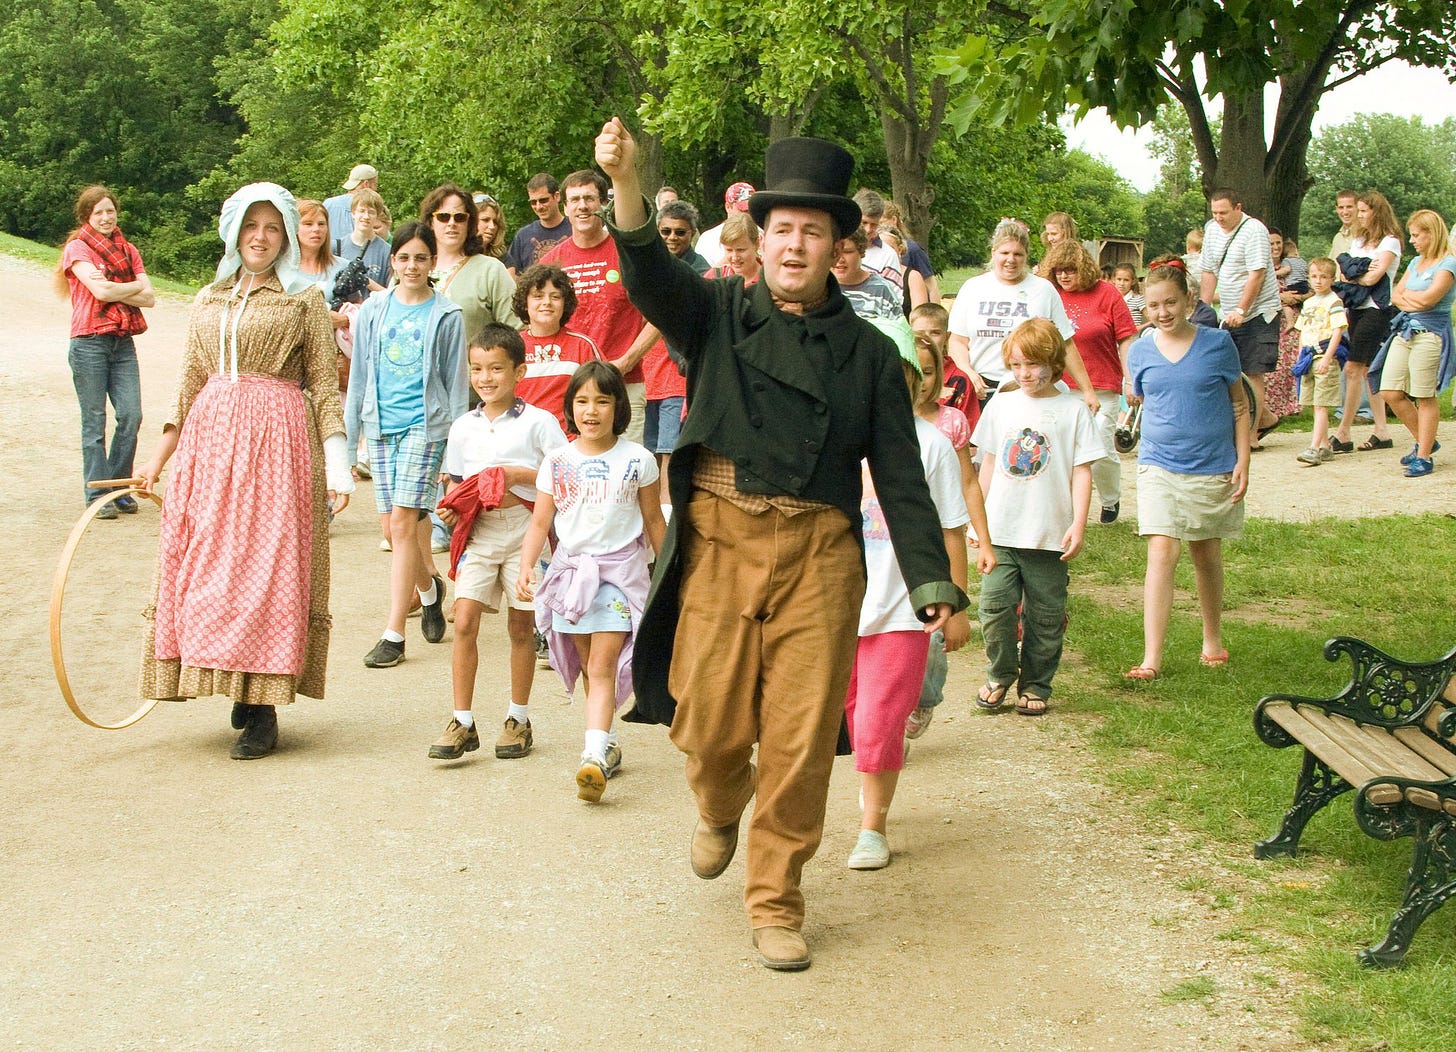 Wearing a top hat and tailcoat, I'm leading a group of 30 museum guests down a dirt road after a museum theater performace.